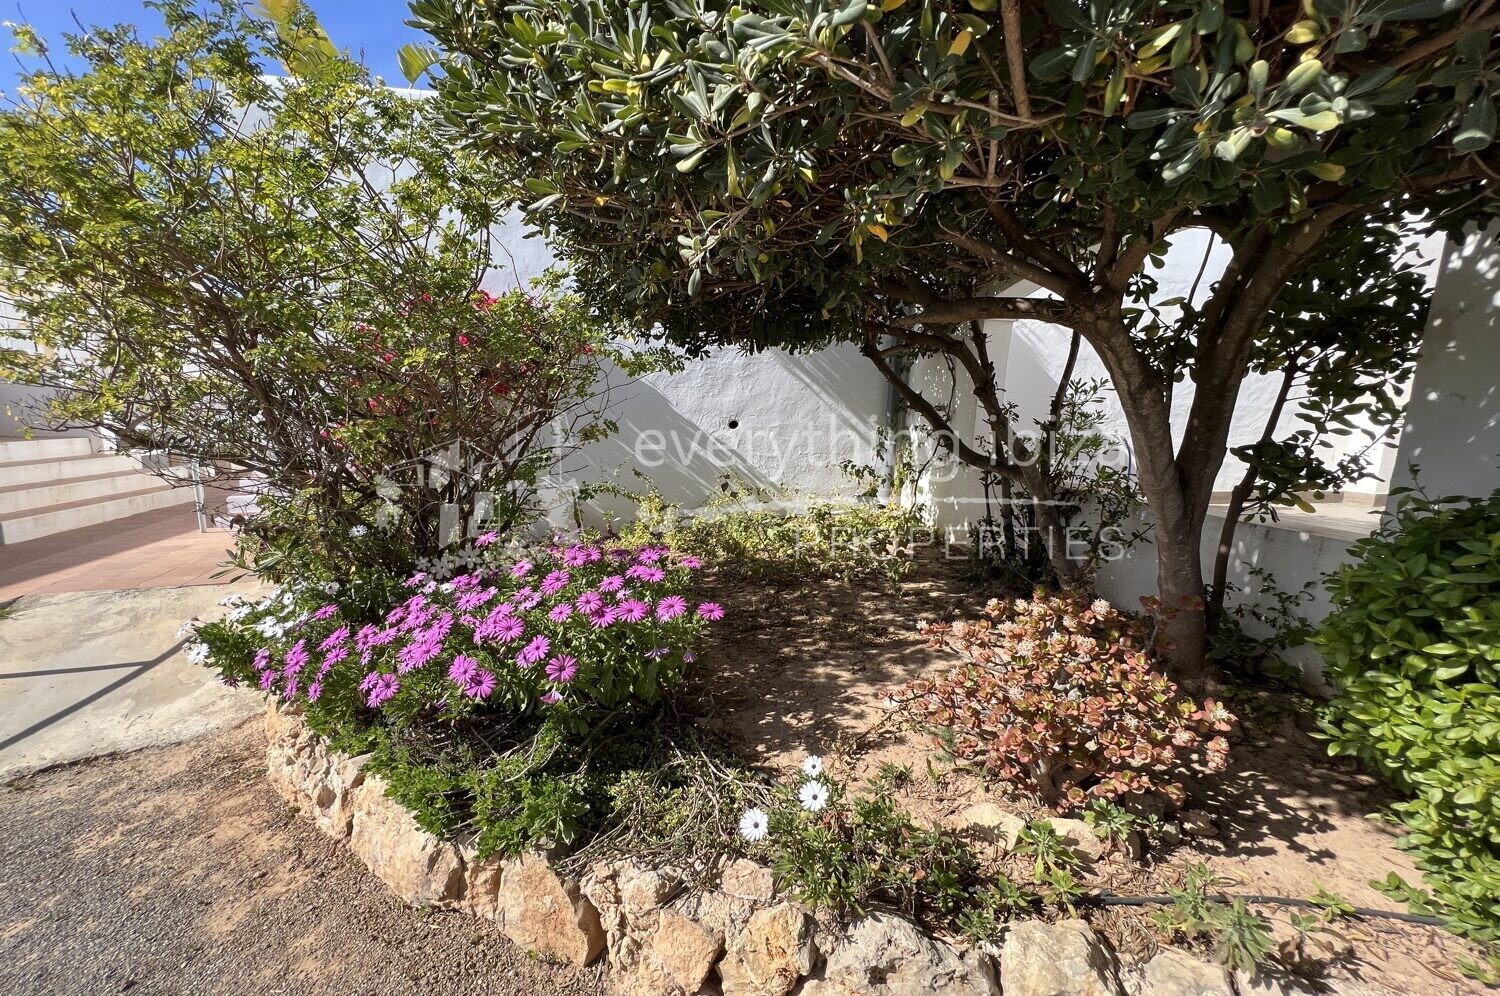 Duplex Townhouse with Sea & Es Vedra Views, ref. 1431, for sale in Ibiza with everything ibiza Properties